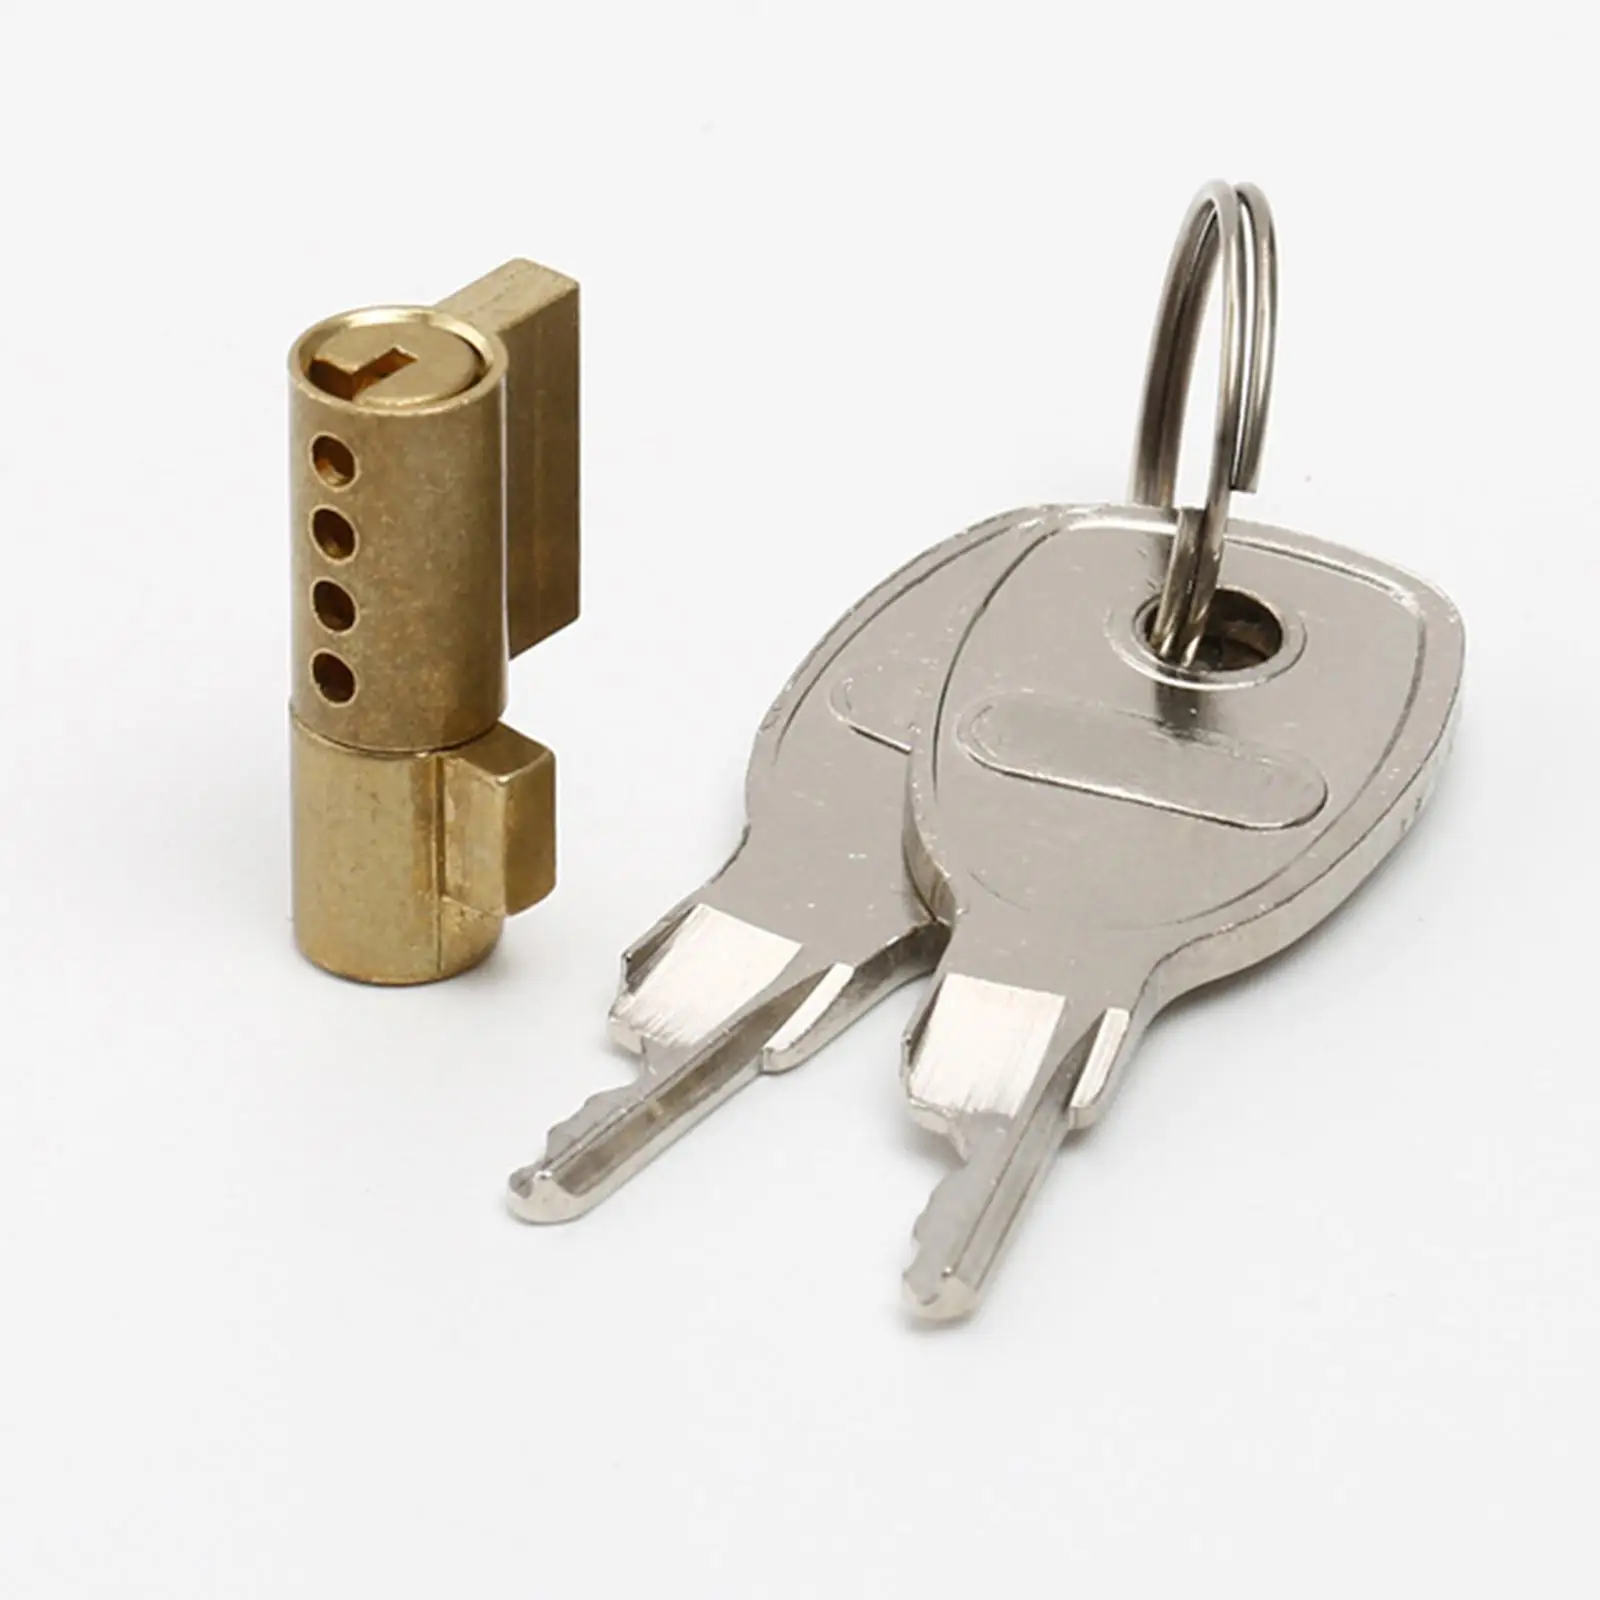 Trailer Coupling Hitch Lock Partical Sturdy Brass for Drawer Lock Freezer Car Cabinets Lock Office Cabinet Combination Lock